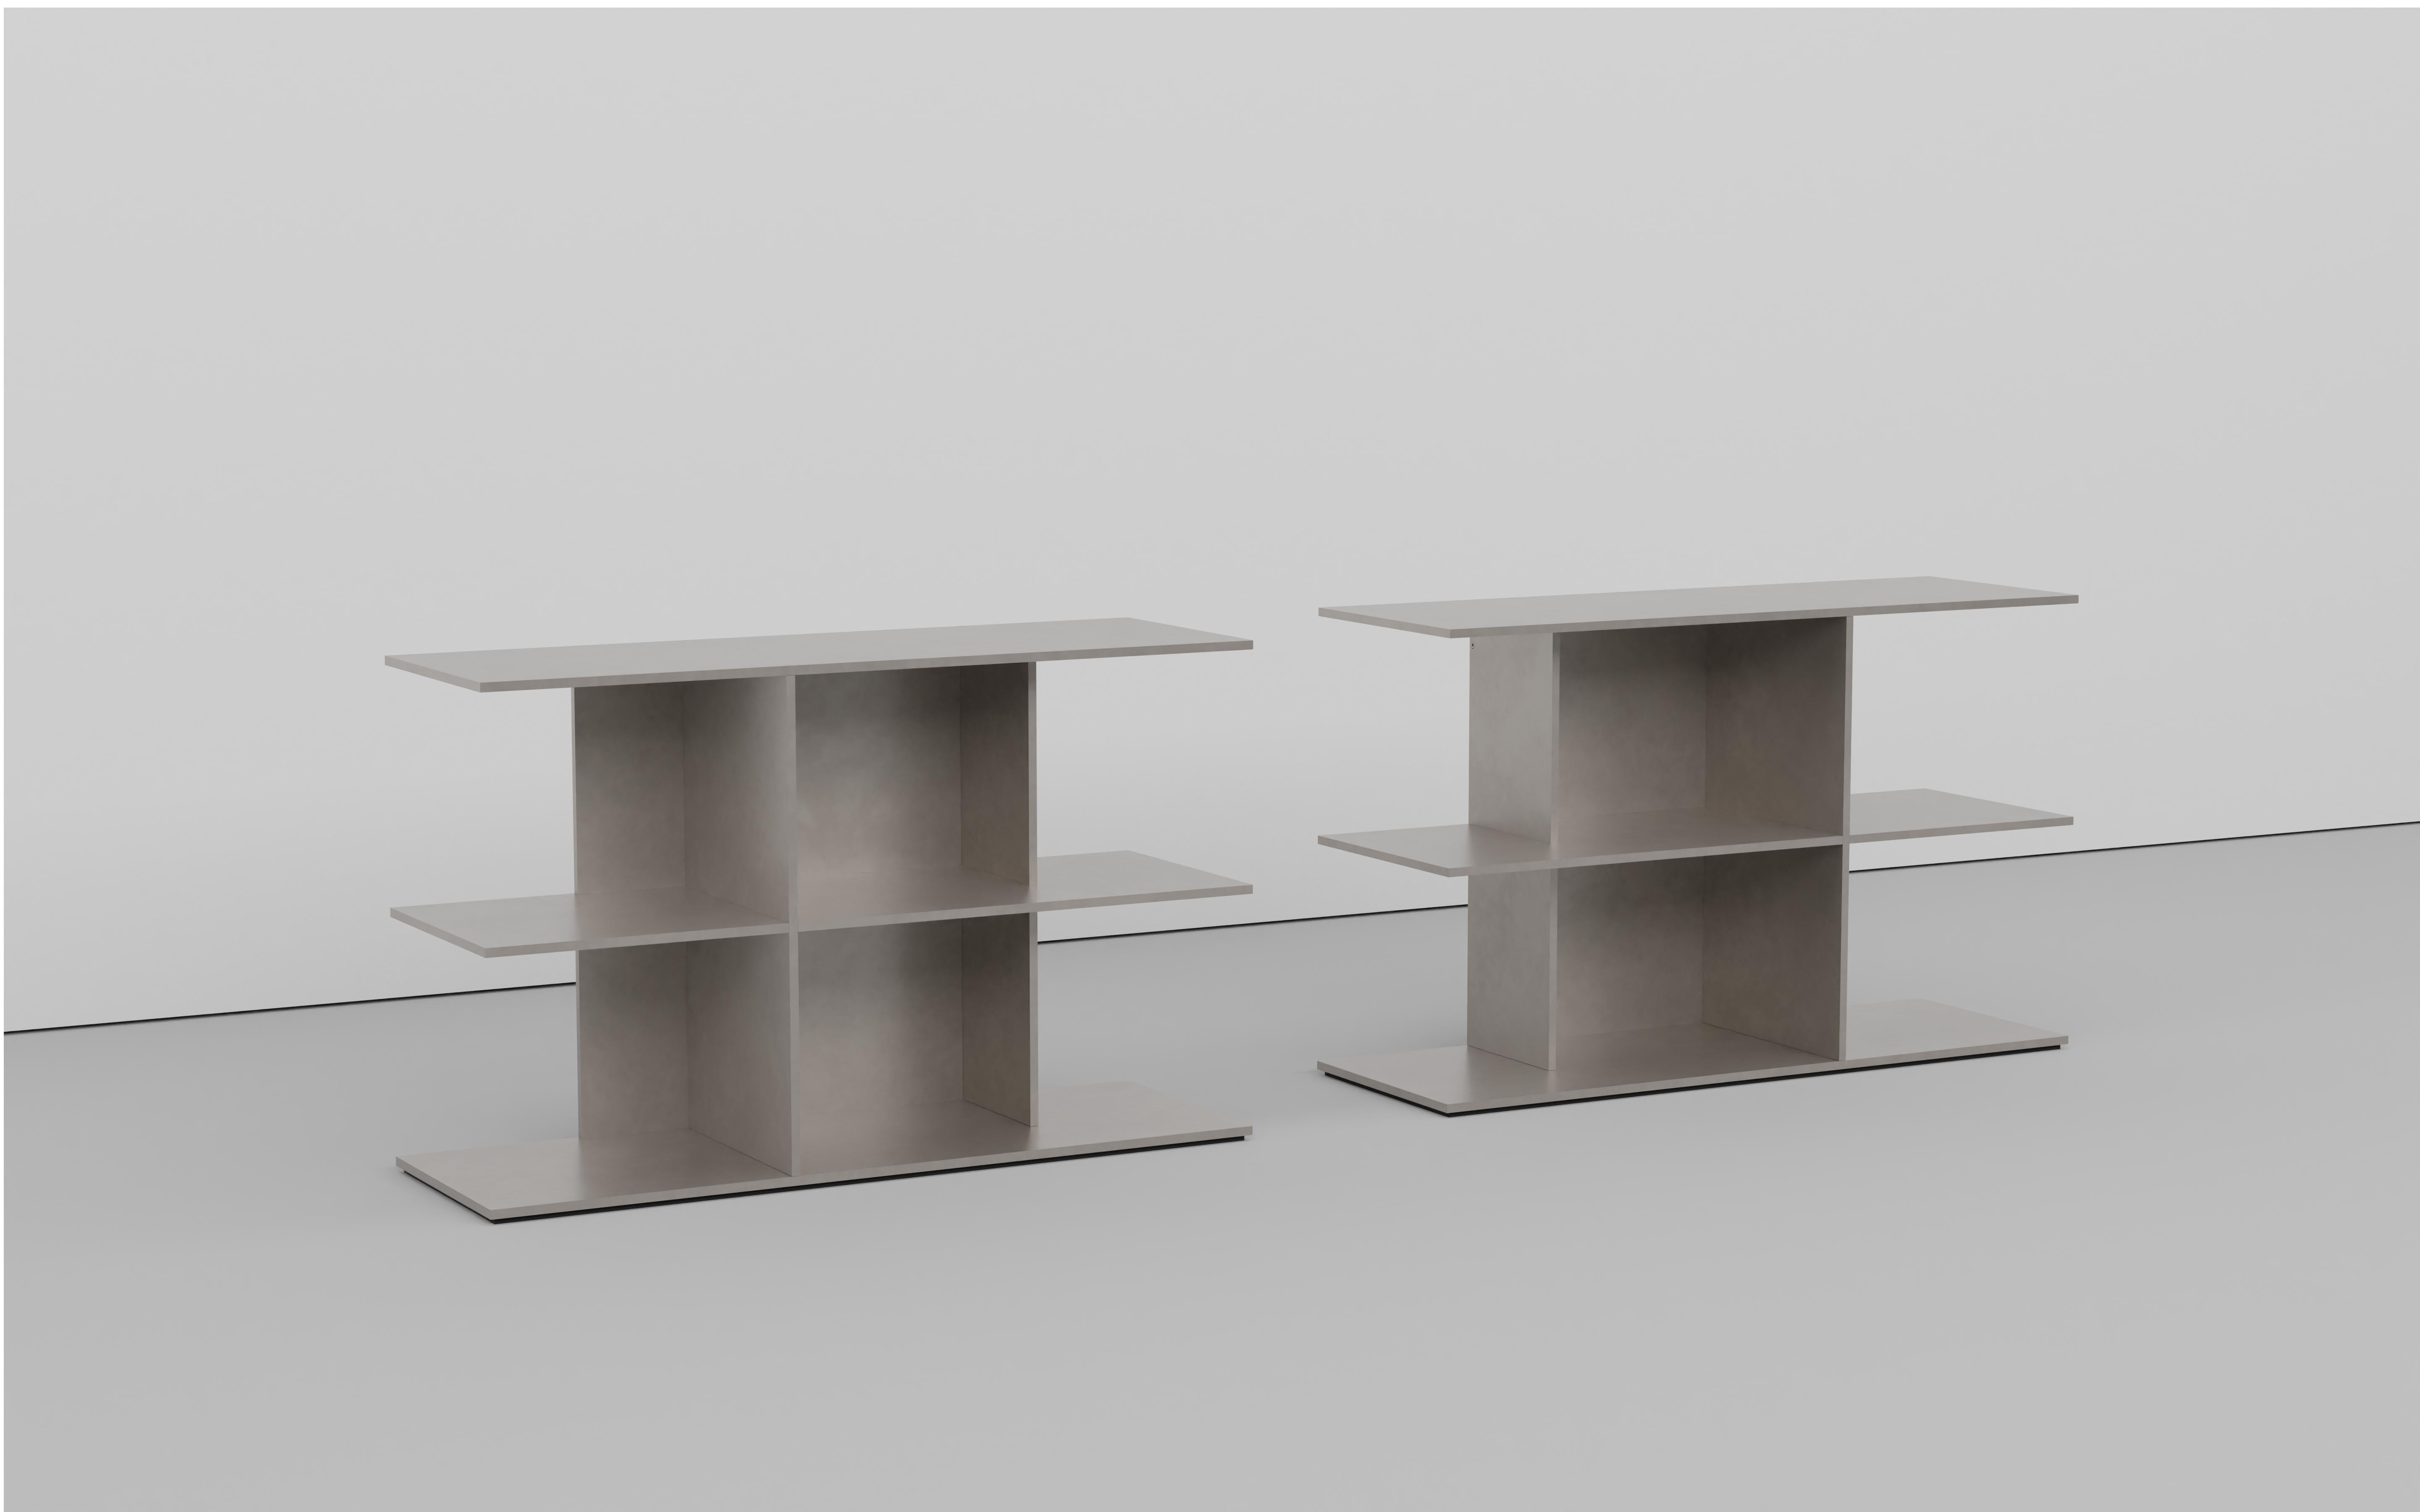 Minimalist tiered table in bolted together 3-8 inch thick aluminum plate. The underside has a recessed, cut rubber sheet with an inset signed label. Available in mirrored left and right models. Made to be a book shelf and with a cushion, a window